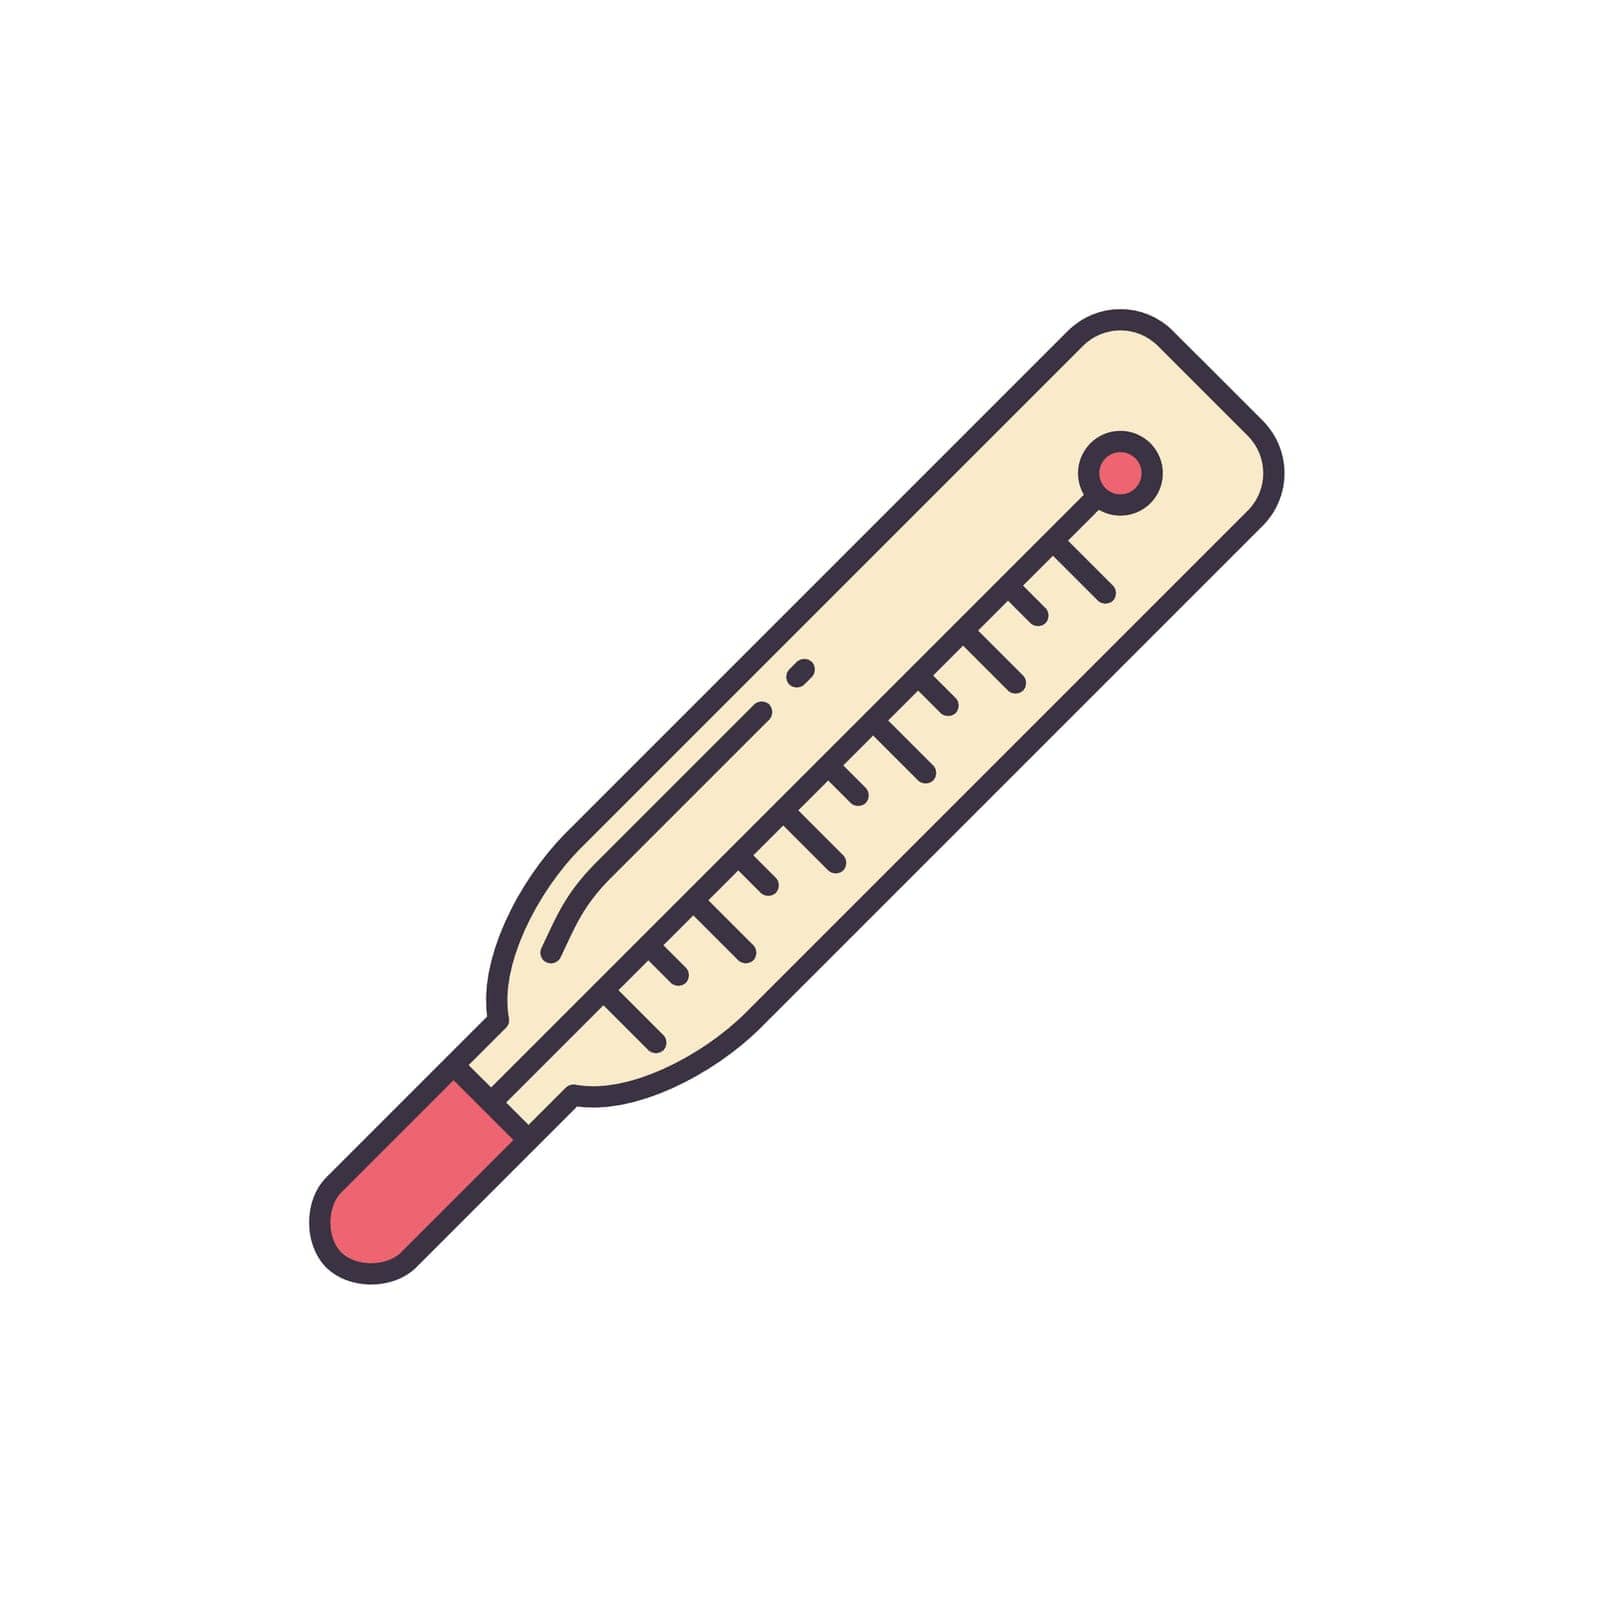 Medical Thermometer related vector icon. by smoki